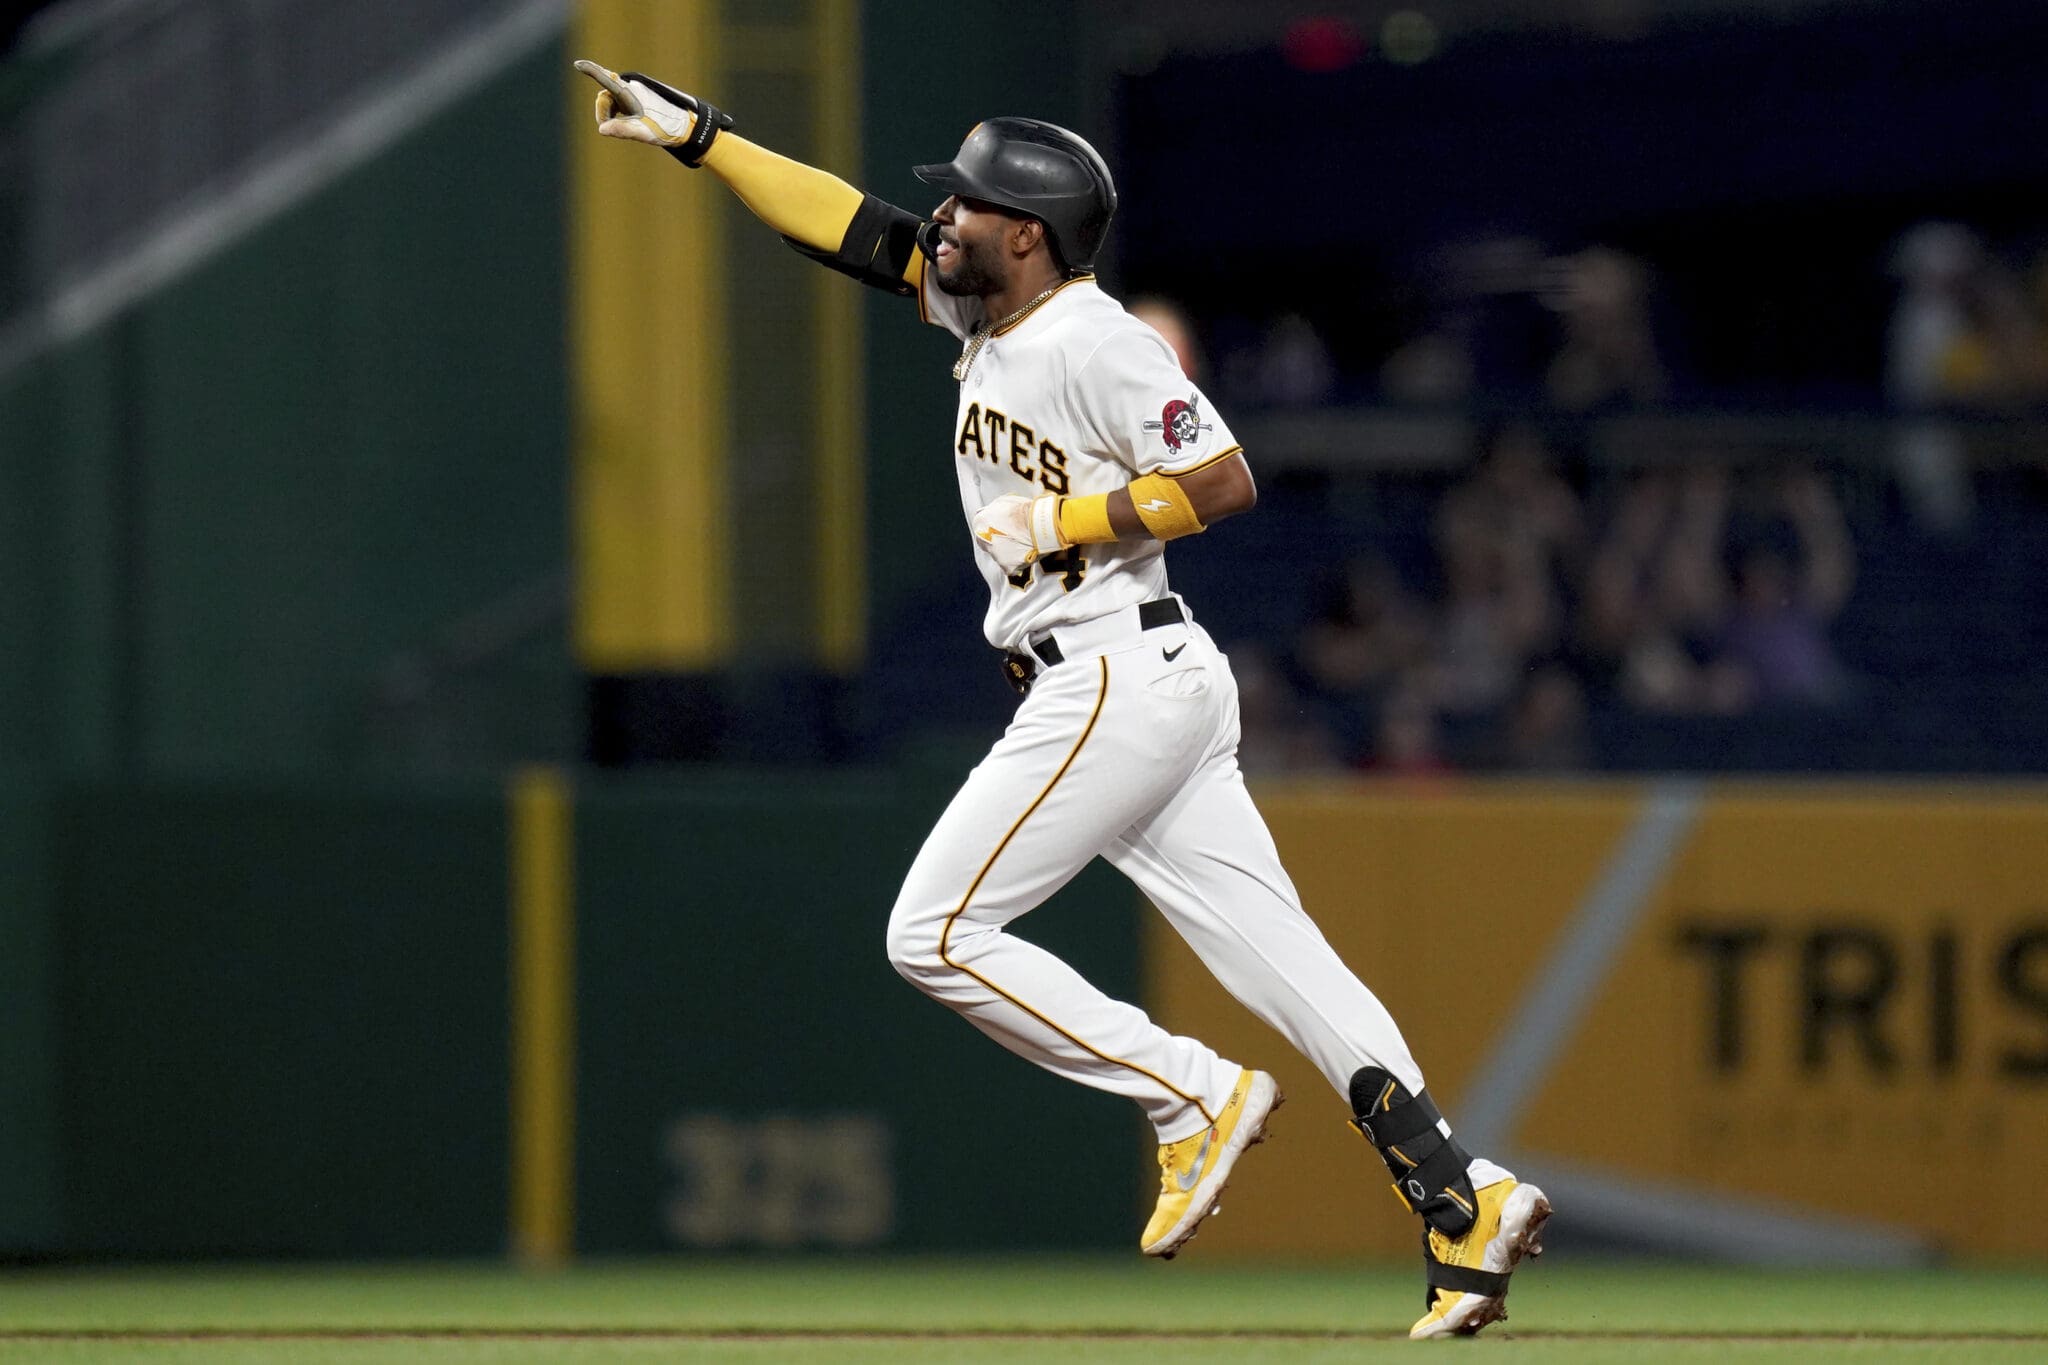 Pittsburgh Pirates outfielder Joshua Palacios rounds the bases after hitting a three-run home run off St. Louis Cardinals starting pitcher Drew Rom in the fourth inning of a baseball game in Pittsburgh, Monday, Aug. 21, 2023. (AP Photo/Matt Freed)